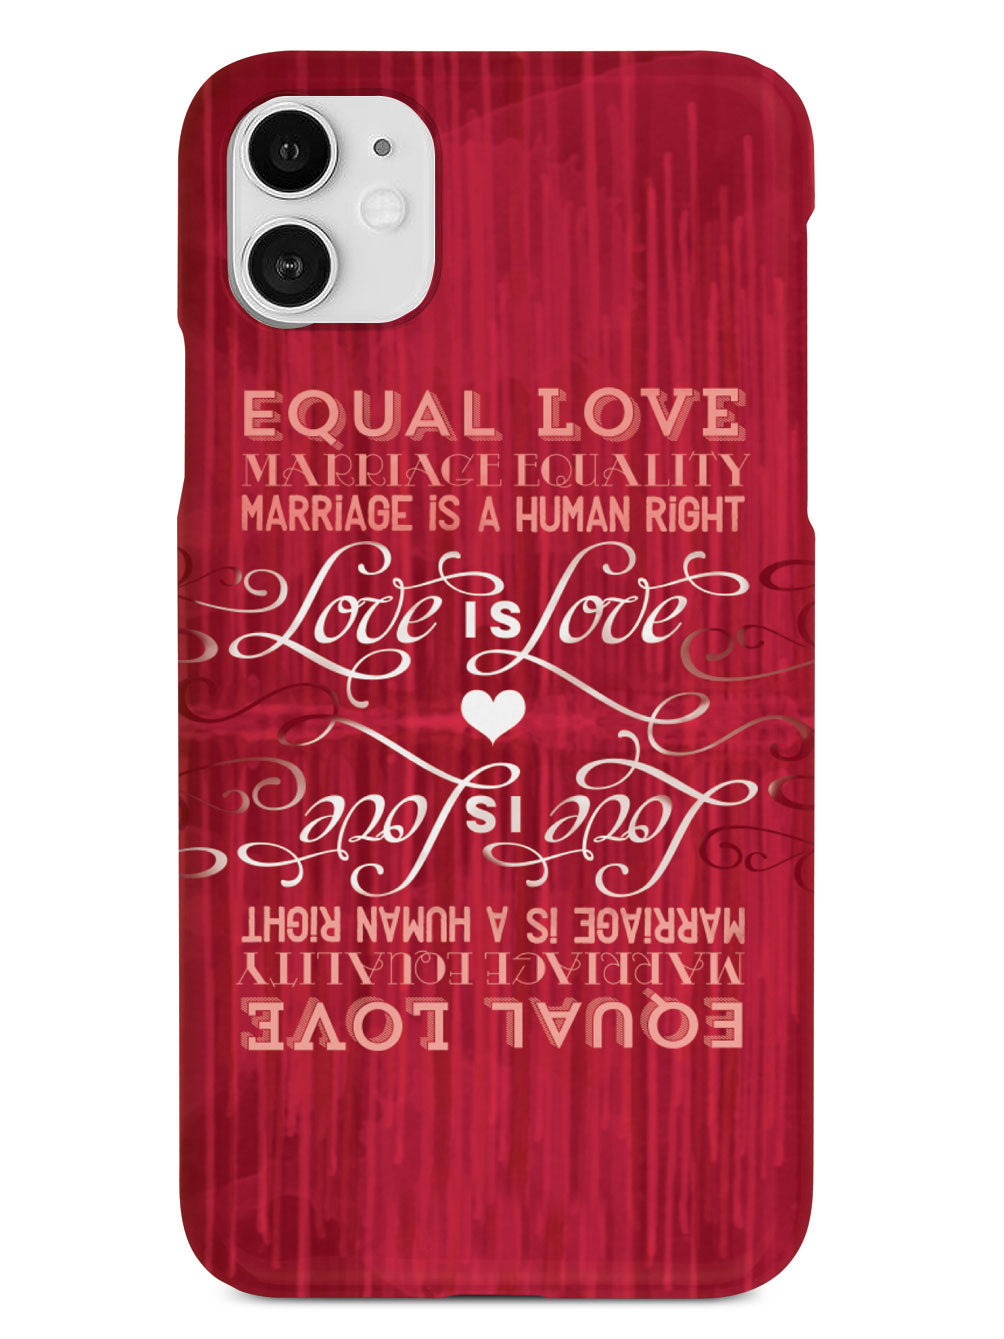 Marriage Equality - Equal Rights, Love is Love Case